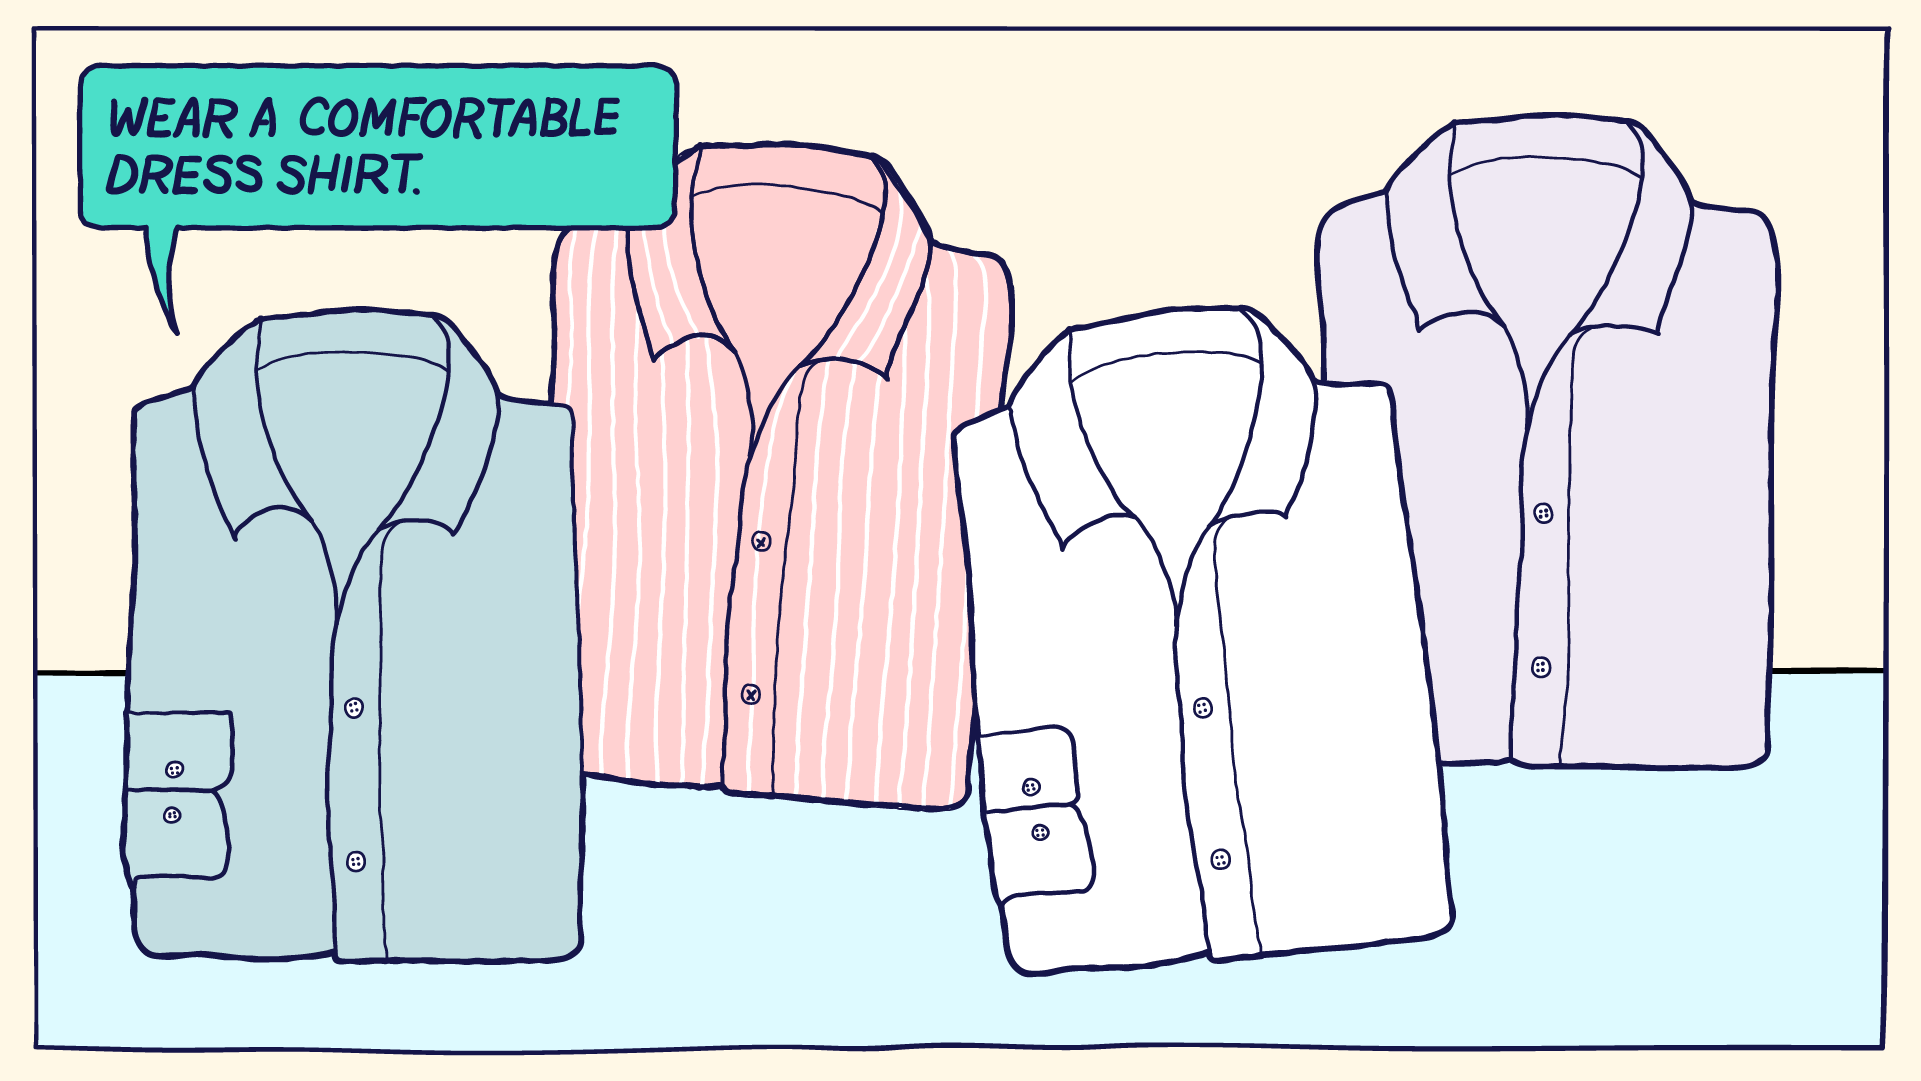 How To Dress For Weddings Picking a Dress Shirt